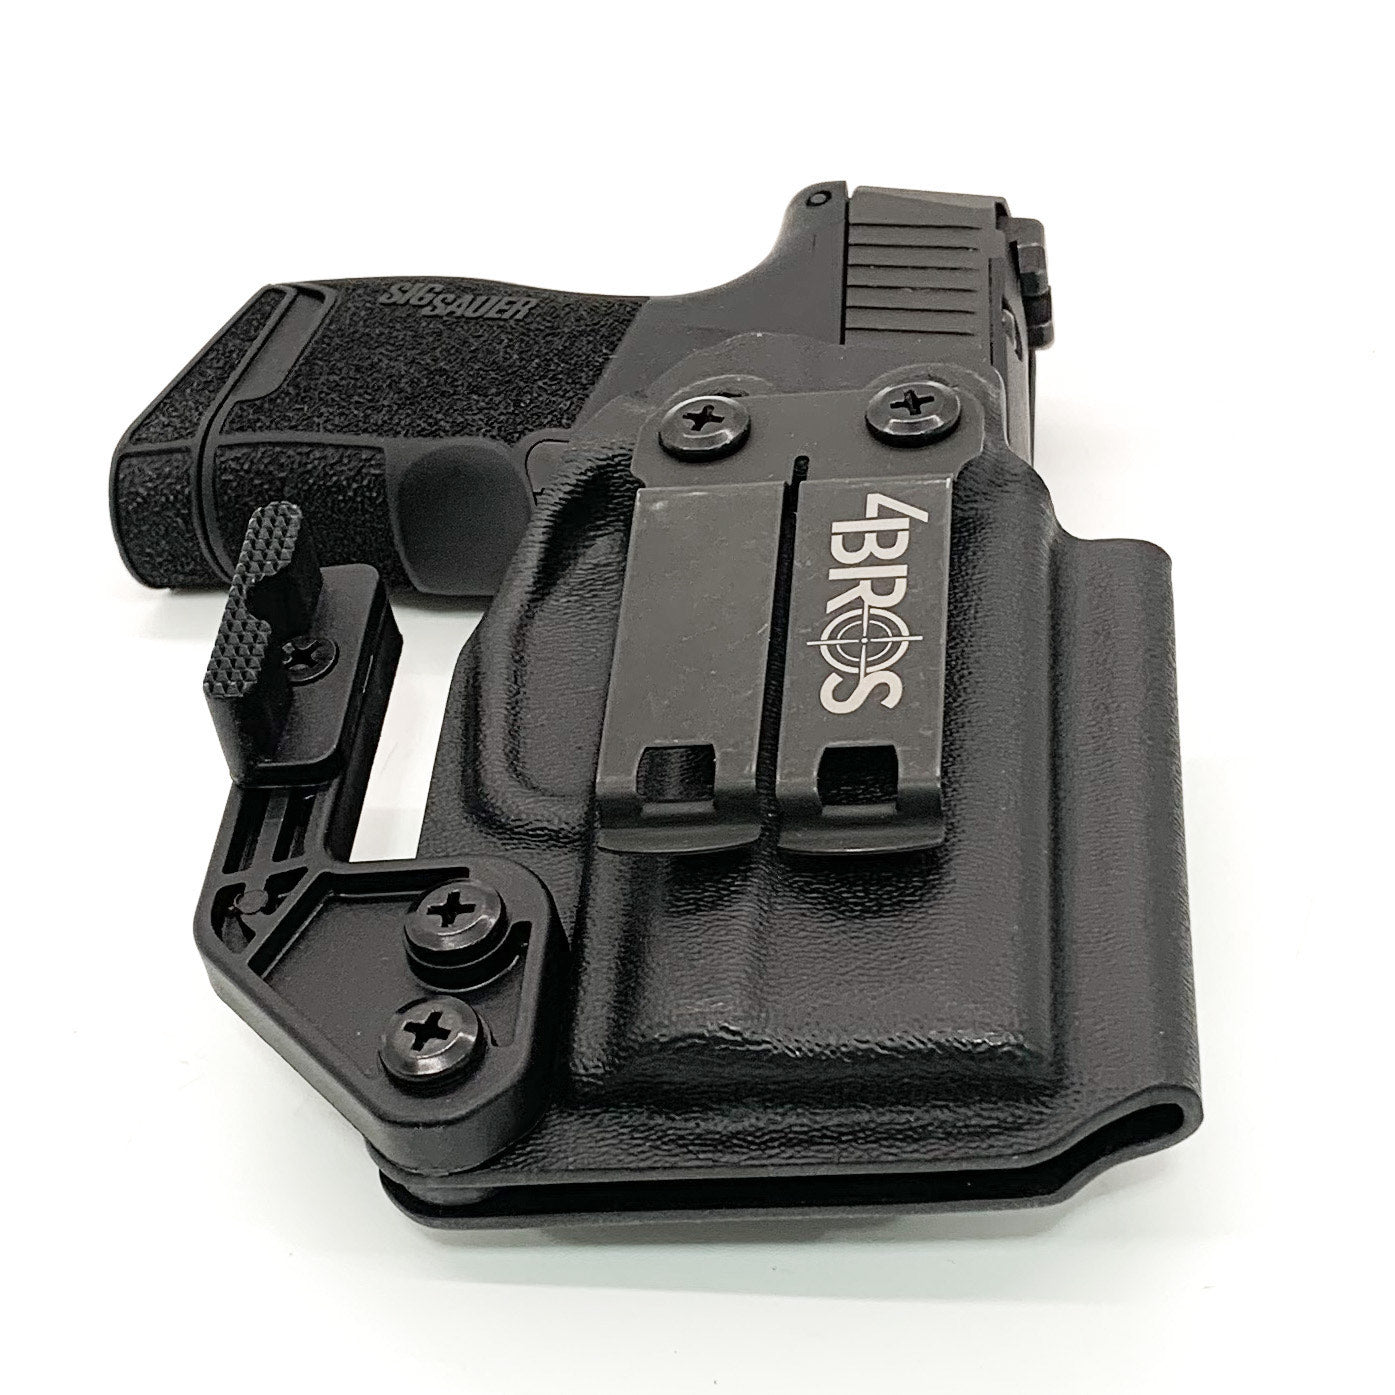 Inside waistband IWB kydex holster designed to fit the Sig Sauer P365 P 365 with GoGuns Gas Pedal holster has adjustable retention High Sweat shield guard FOMI 1.5" Belt attachment Optional Modwing includes 2 inserts to reduce firearm printing Rides close to body and comfortable durable